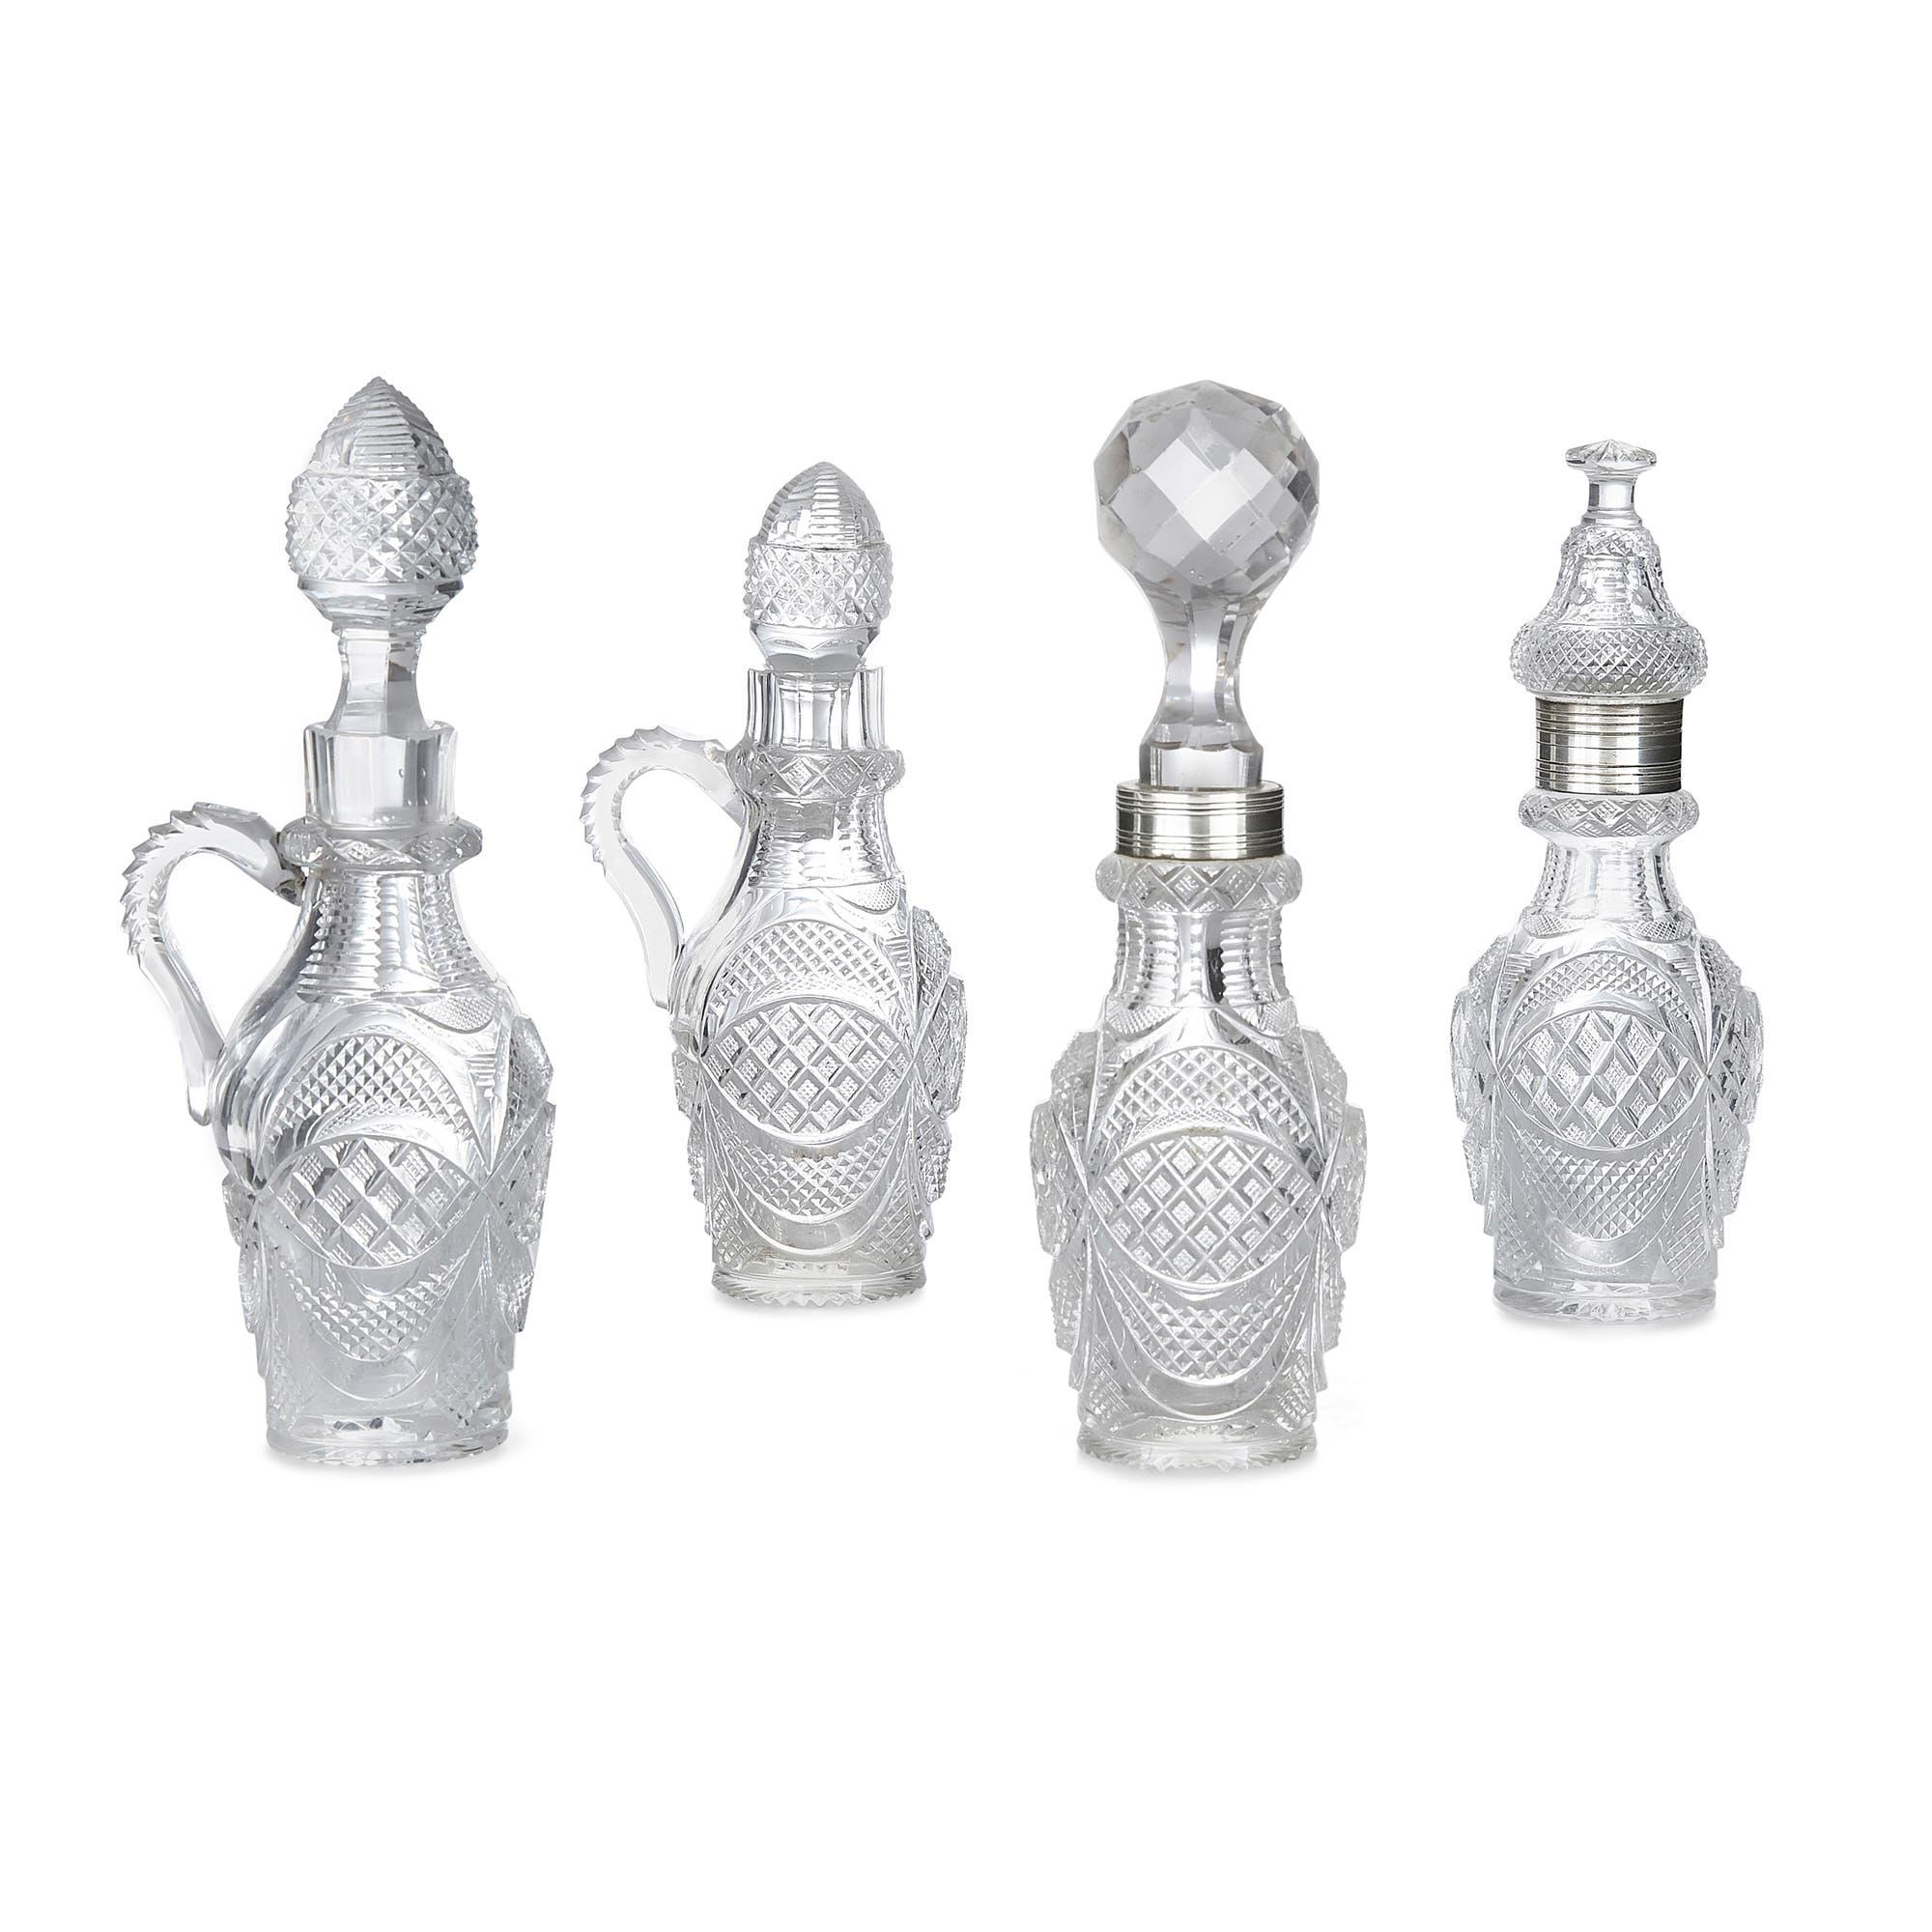 Antique Portuguese silver and cut glass cruet set
Portuguese, early 20th century
Measures: Height 30cm, width 21cm, depth 21cm

This fine Portuguese cruet set is crafted from silver and cut glass. The set includes four glass decanters, the glass